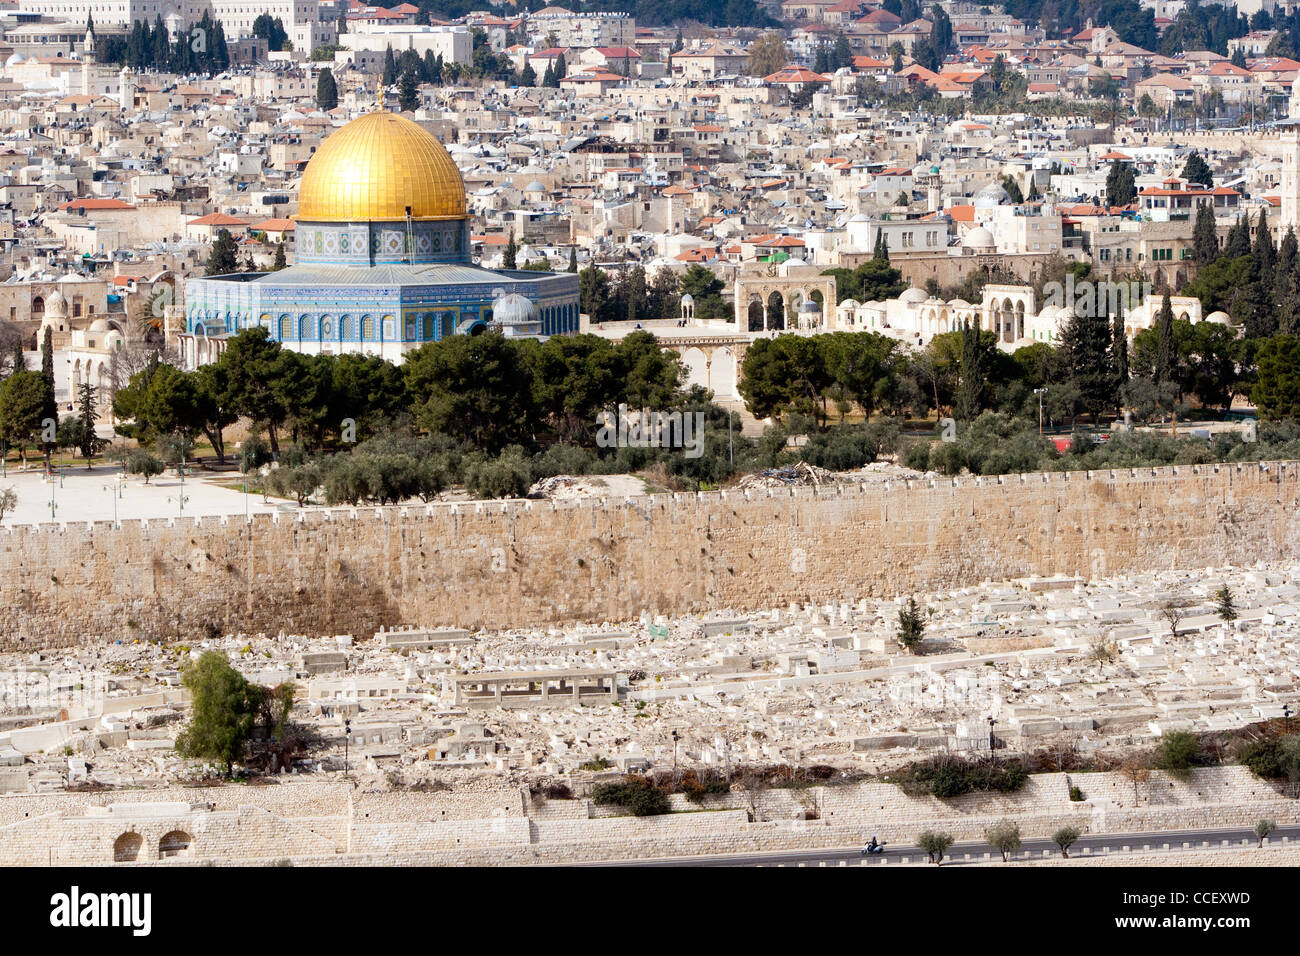 Dome of the Rock on the Temple Mount, Jerusalem, Israel Stock Photo